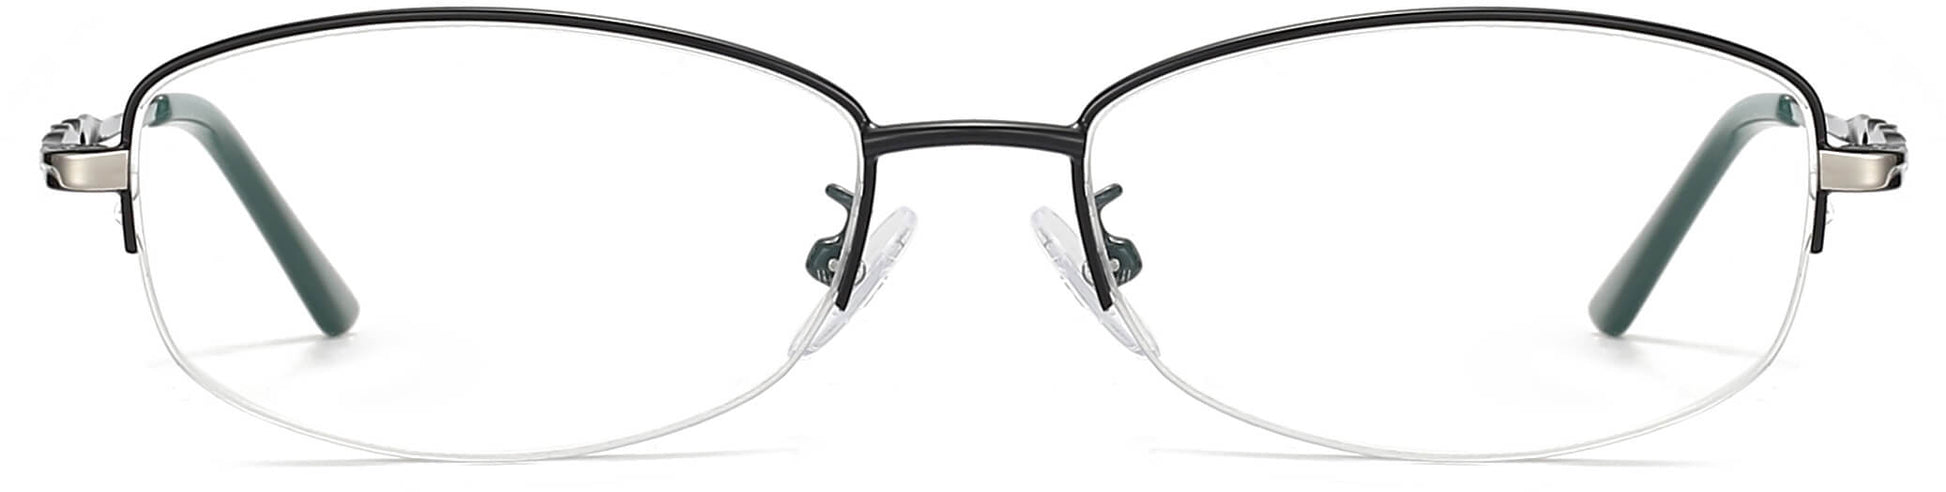 Baylee Round Black Eyeglasses from ANRRI, front view